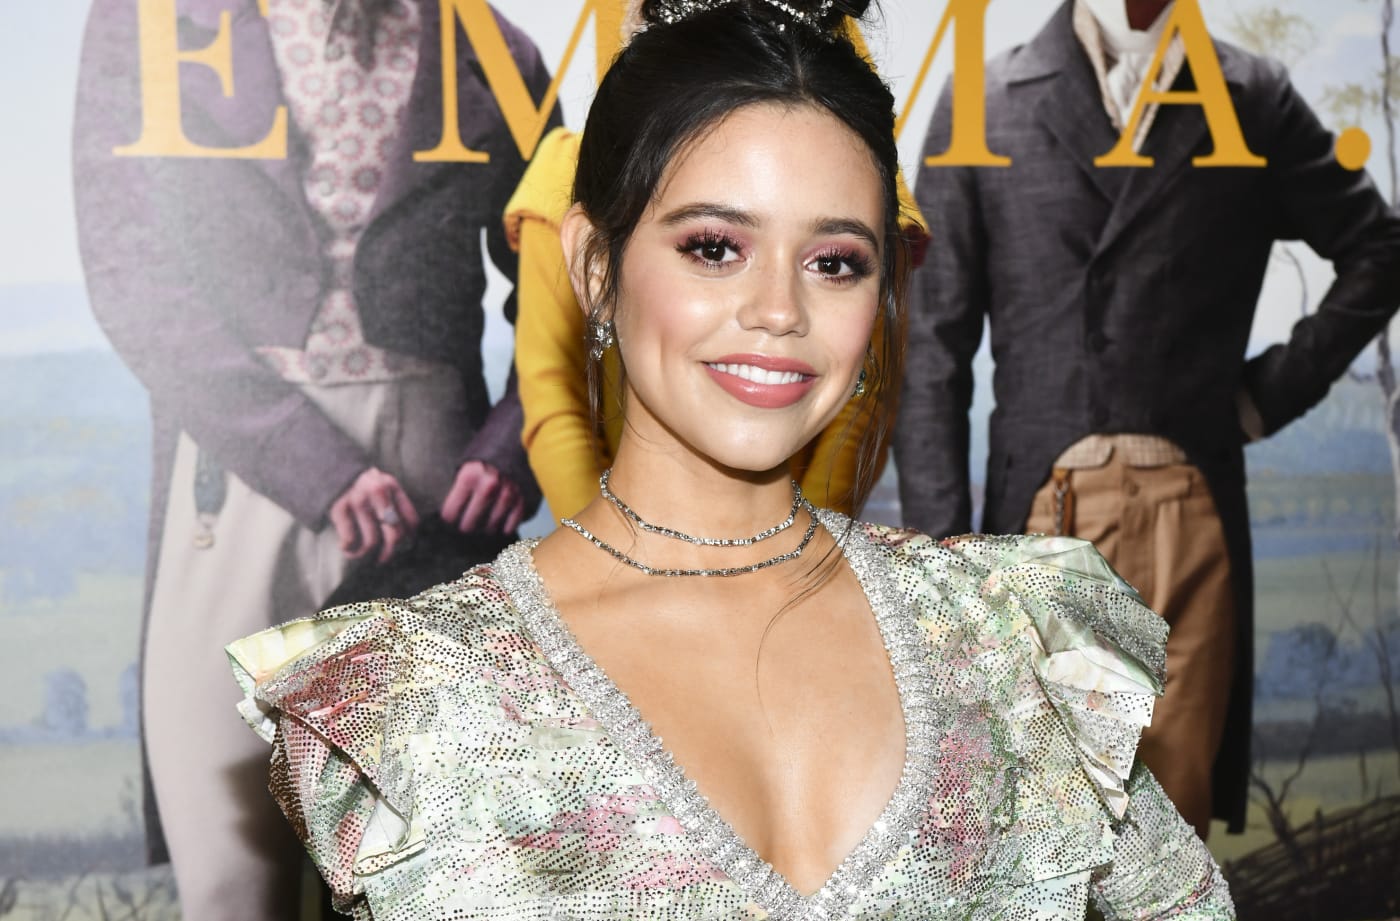 Boys And Girls Bf Download Site - Jenna Ortega 'X' Interview': Star Talks About A24's New Horror Film |  Complex